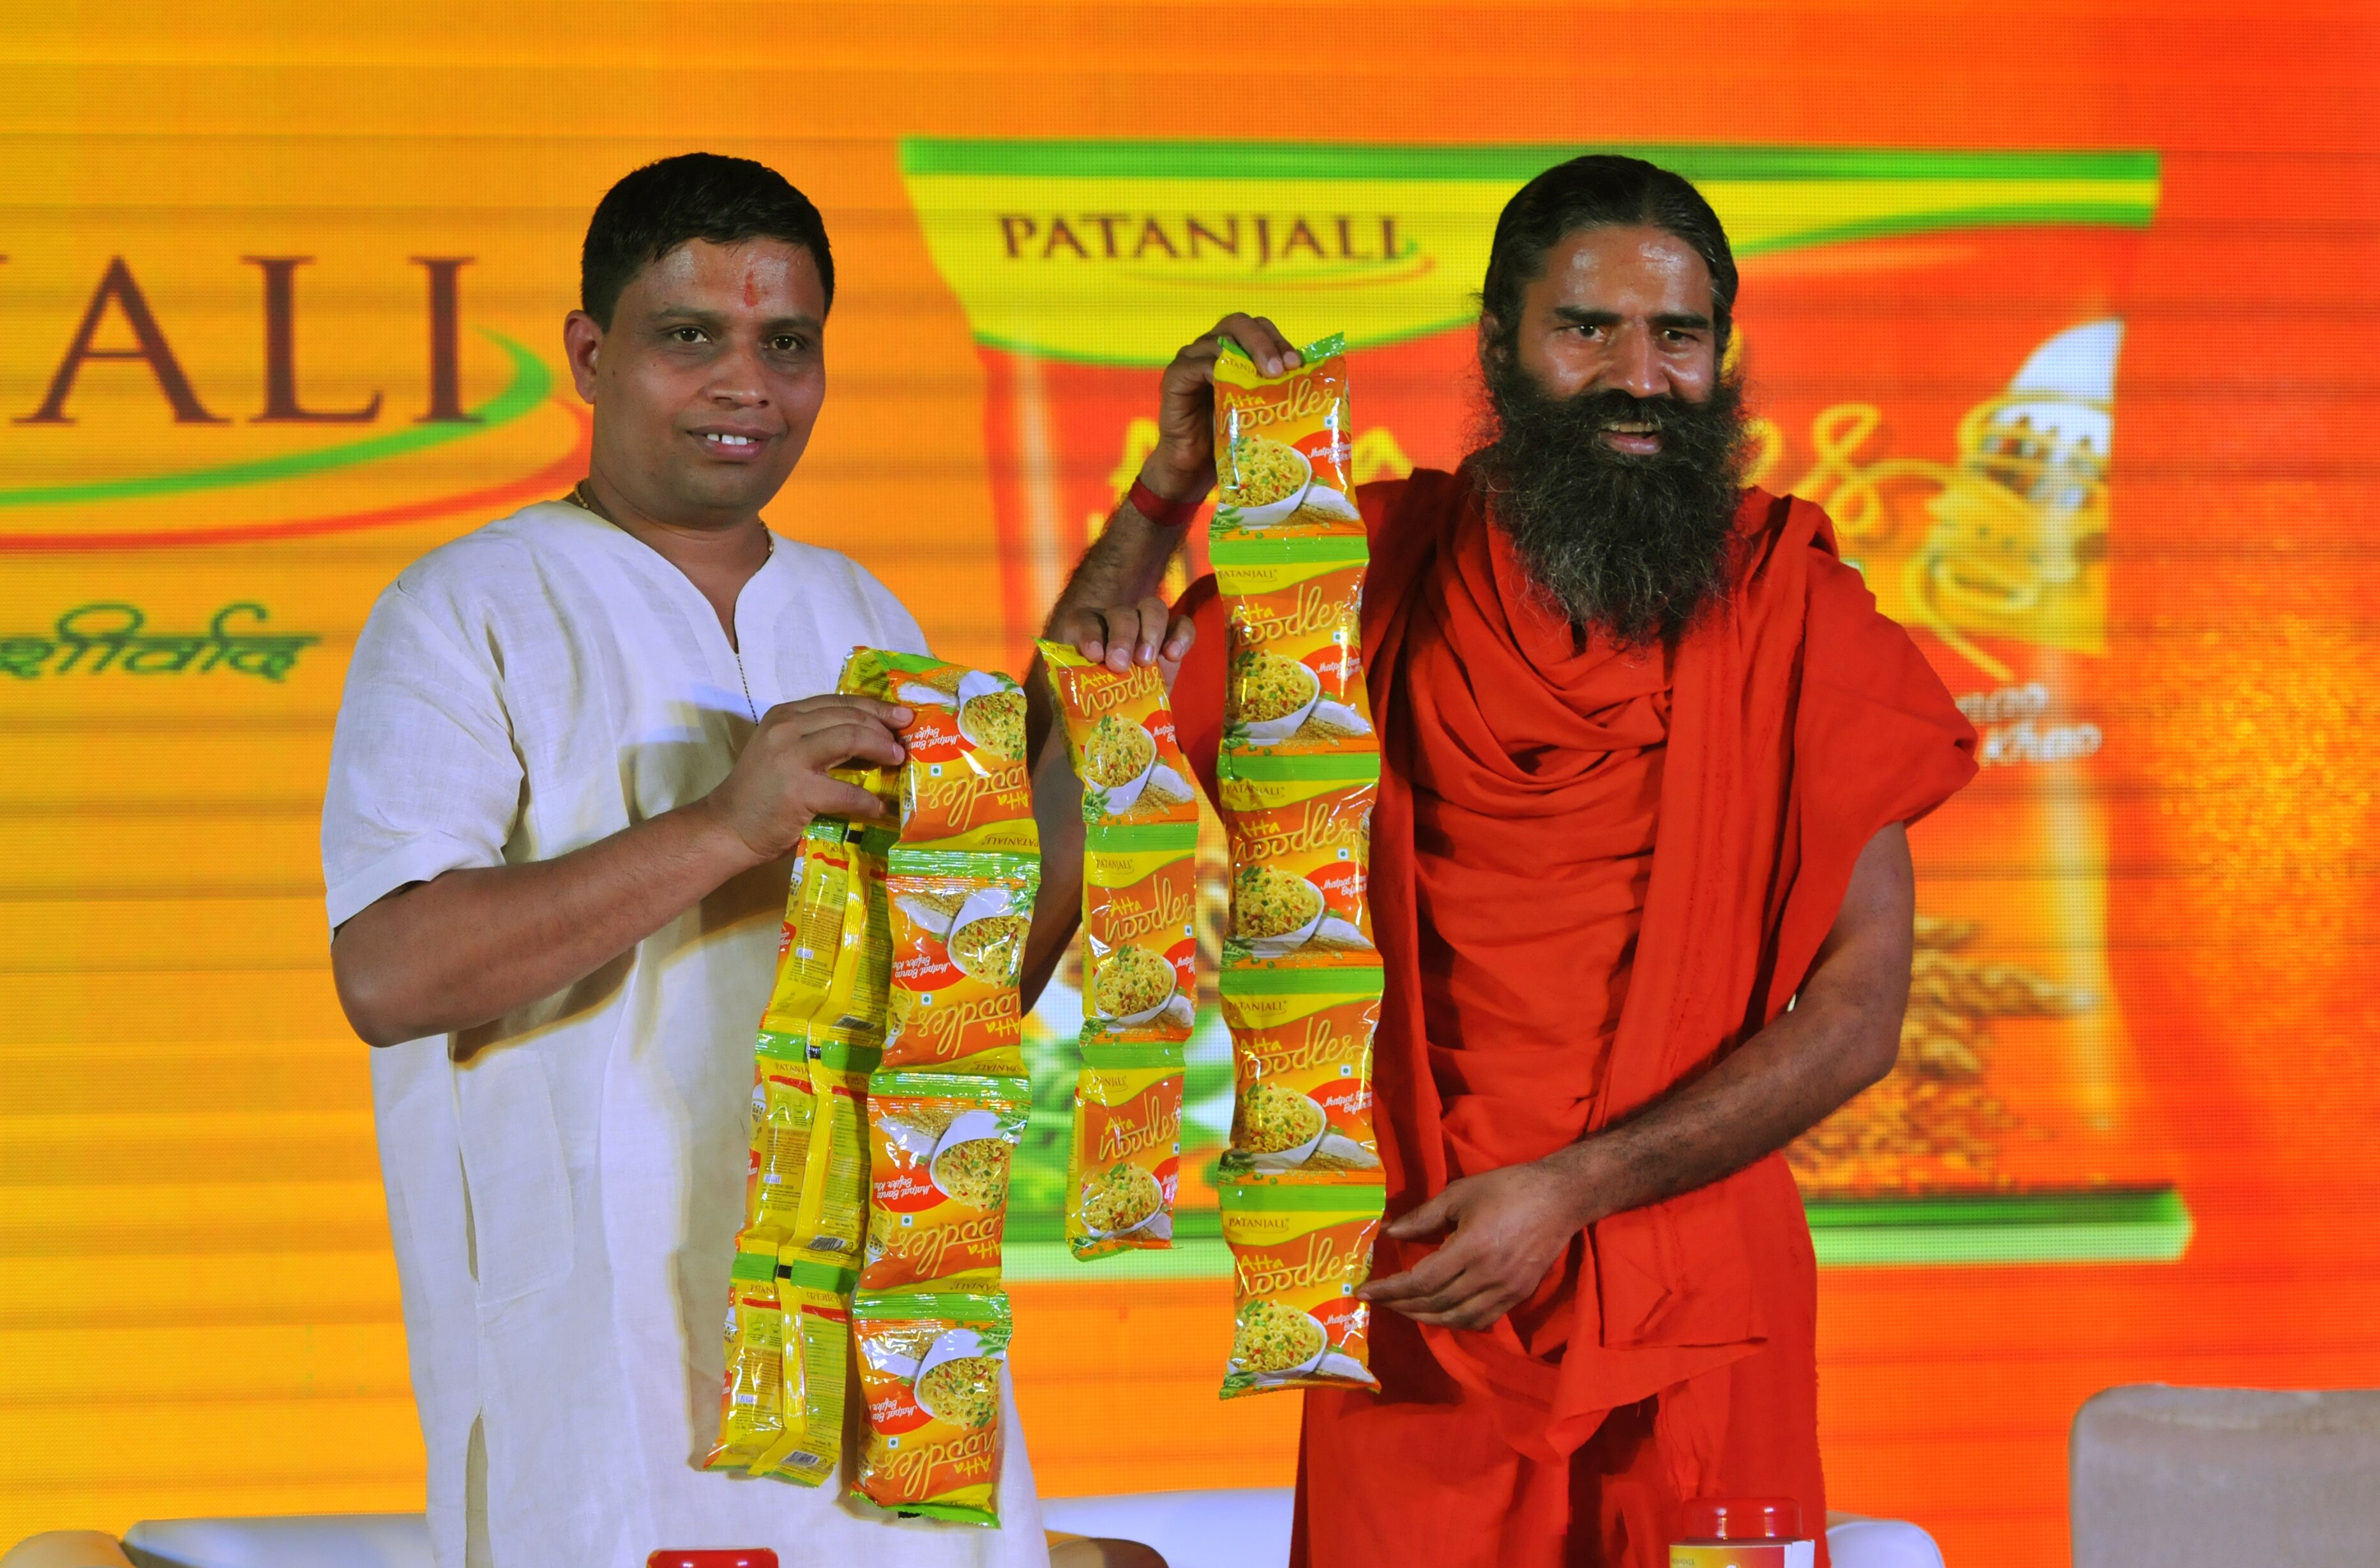  rajkotupdates.news : ruchi soya to be renamed patanjali foods company board approves stock surges